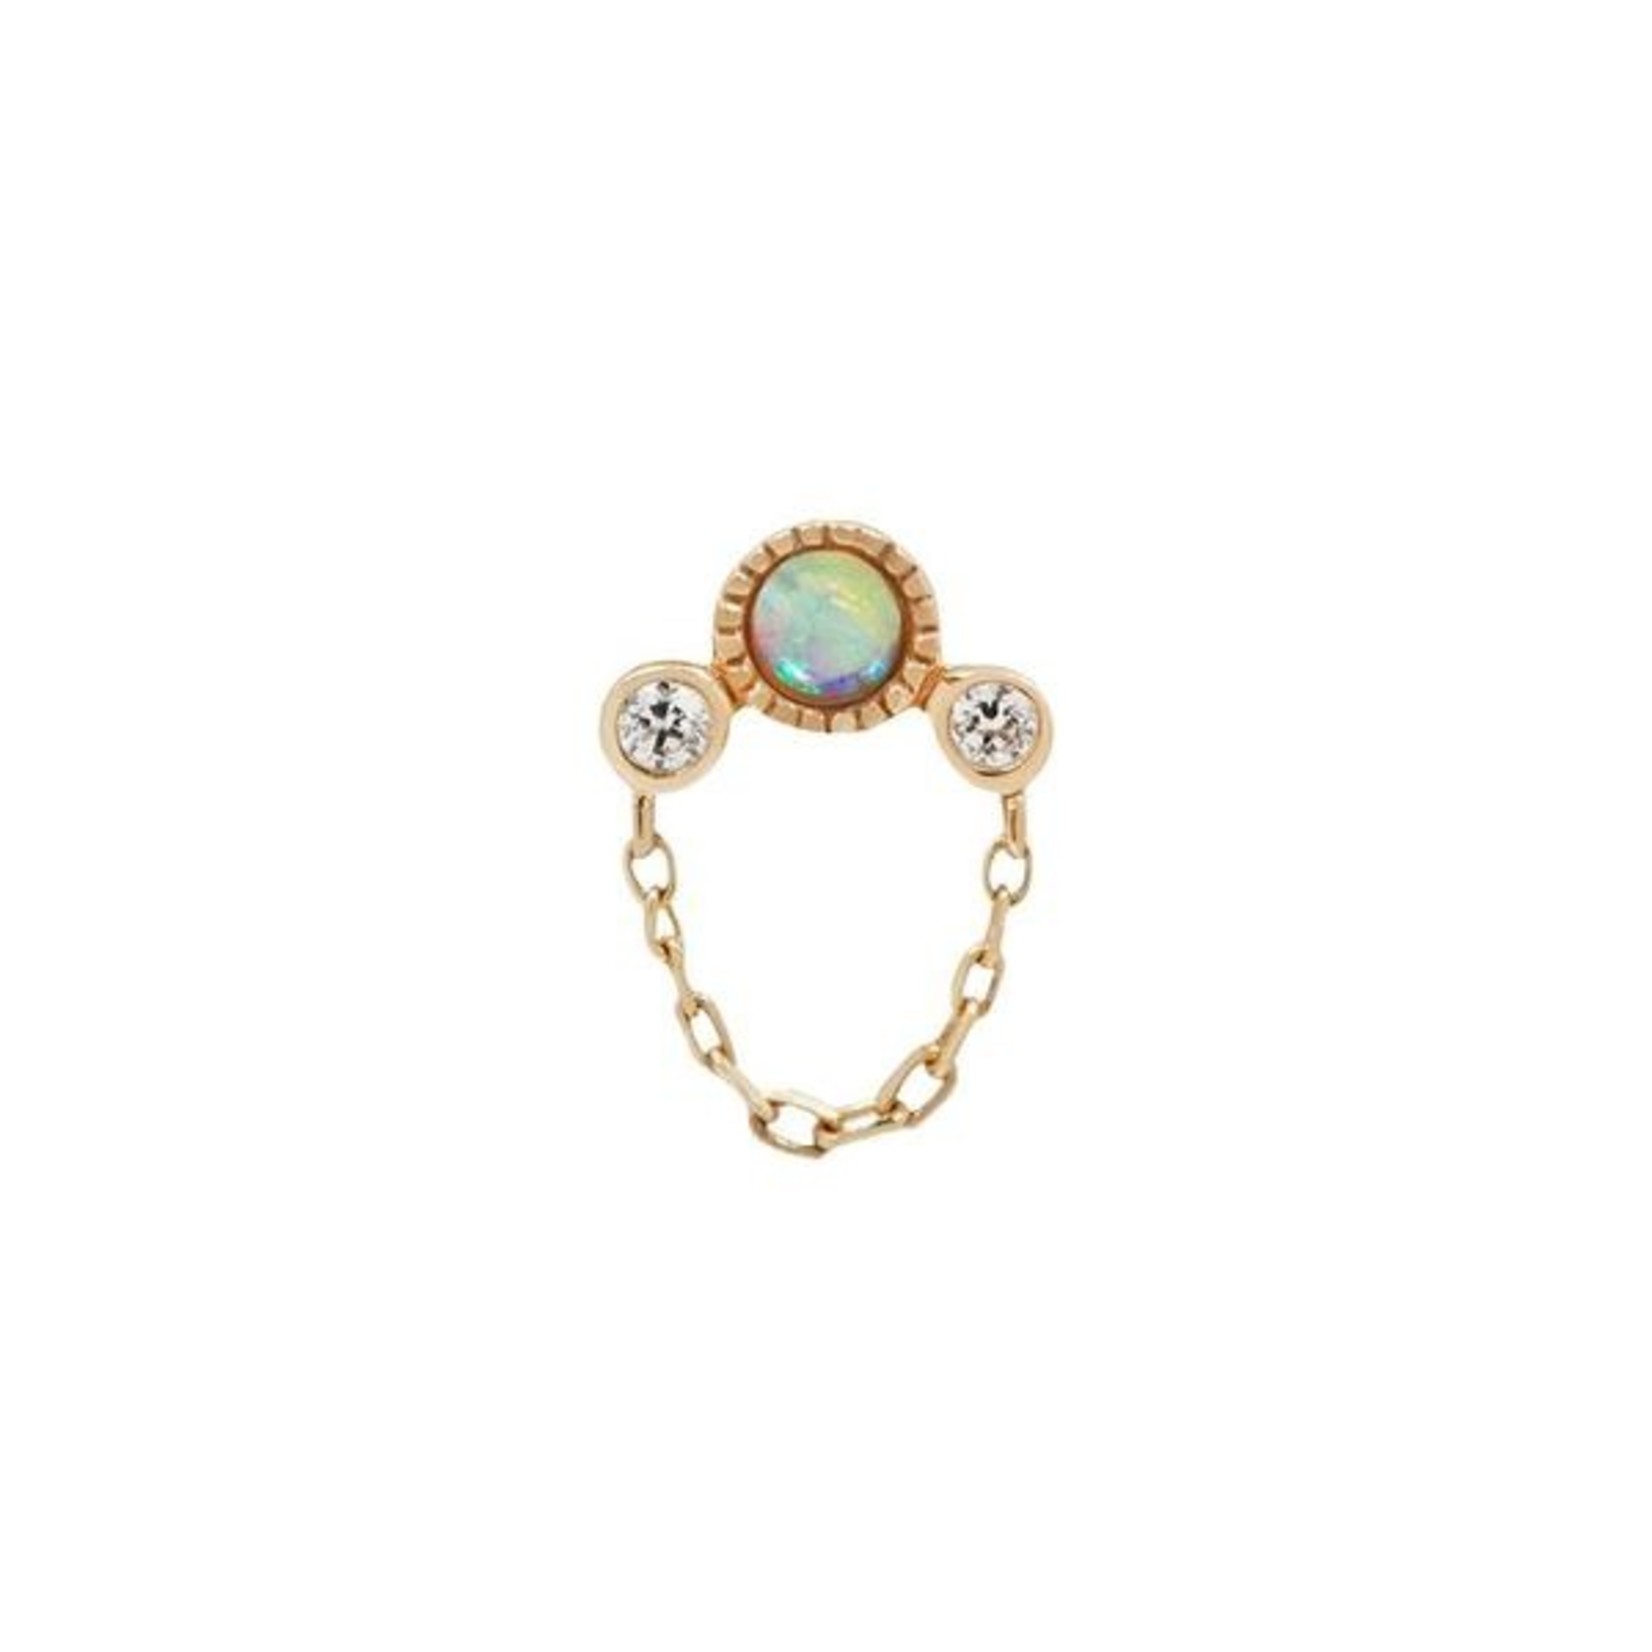 Buddha Jewelry Organics Buddha Jewelry Organics "Halston" press-fit end with genuine opal, chain and CZ